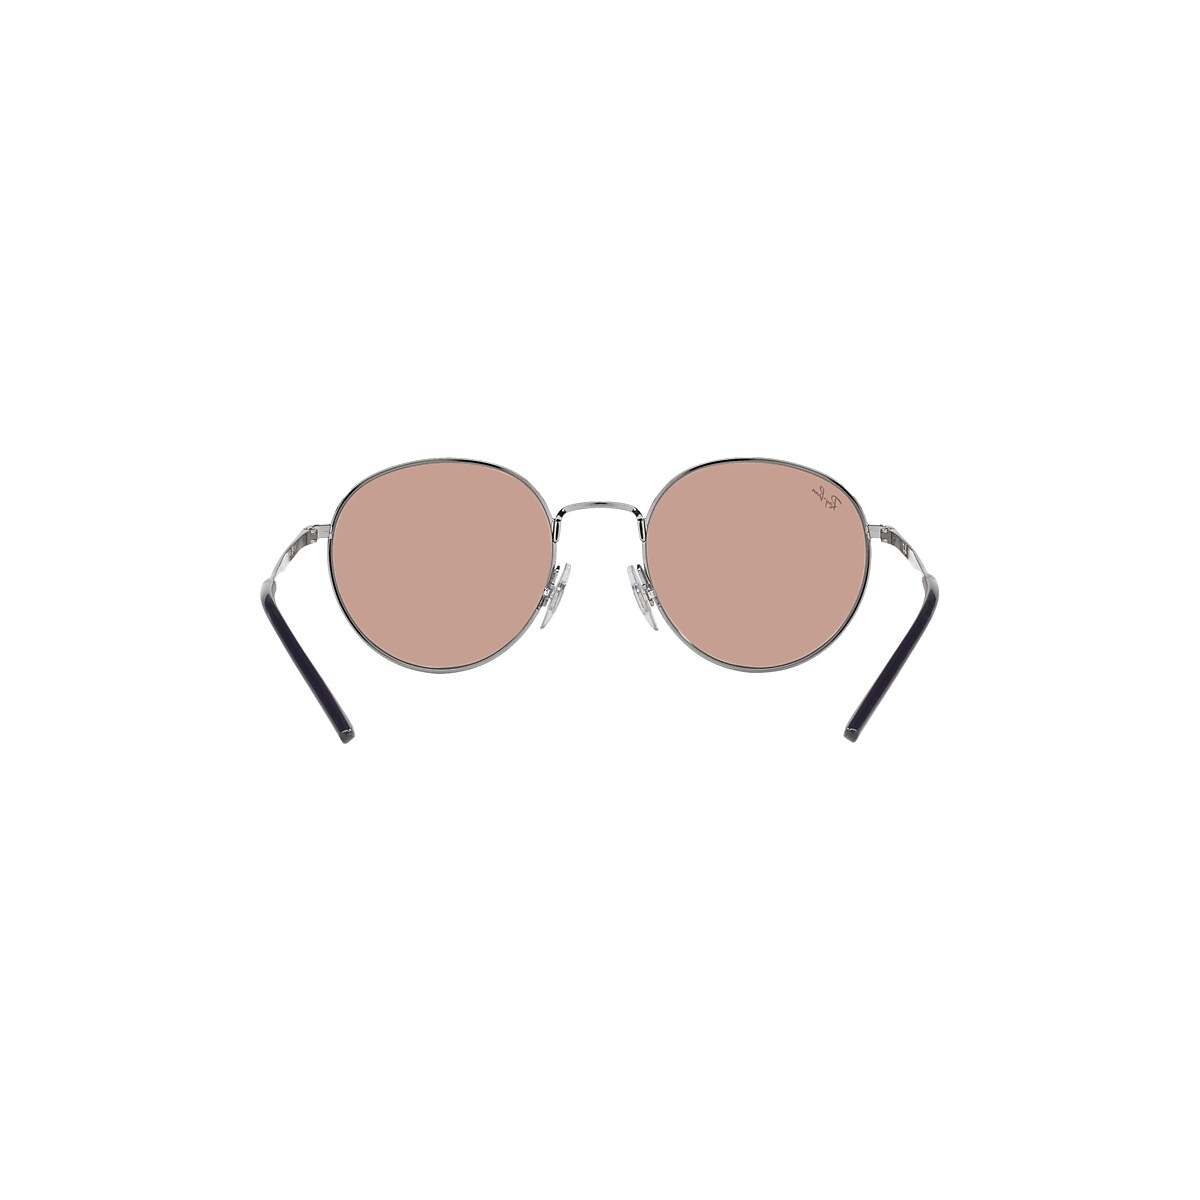 Rb3681 Evolve Sunglasses in Gunmetal and Brown Photochromic | Ray-Ban®